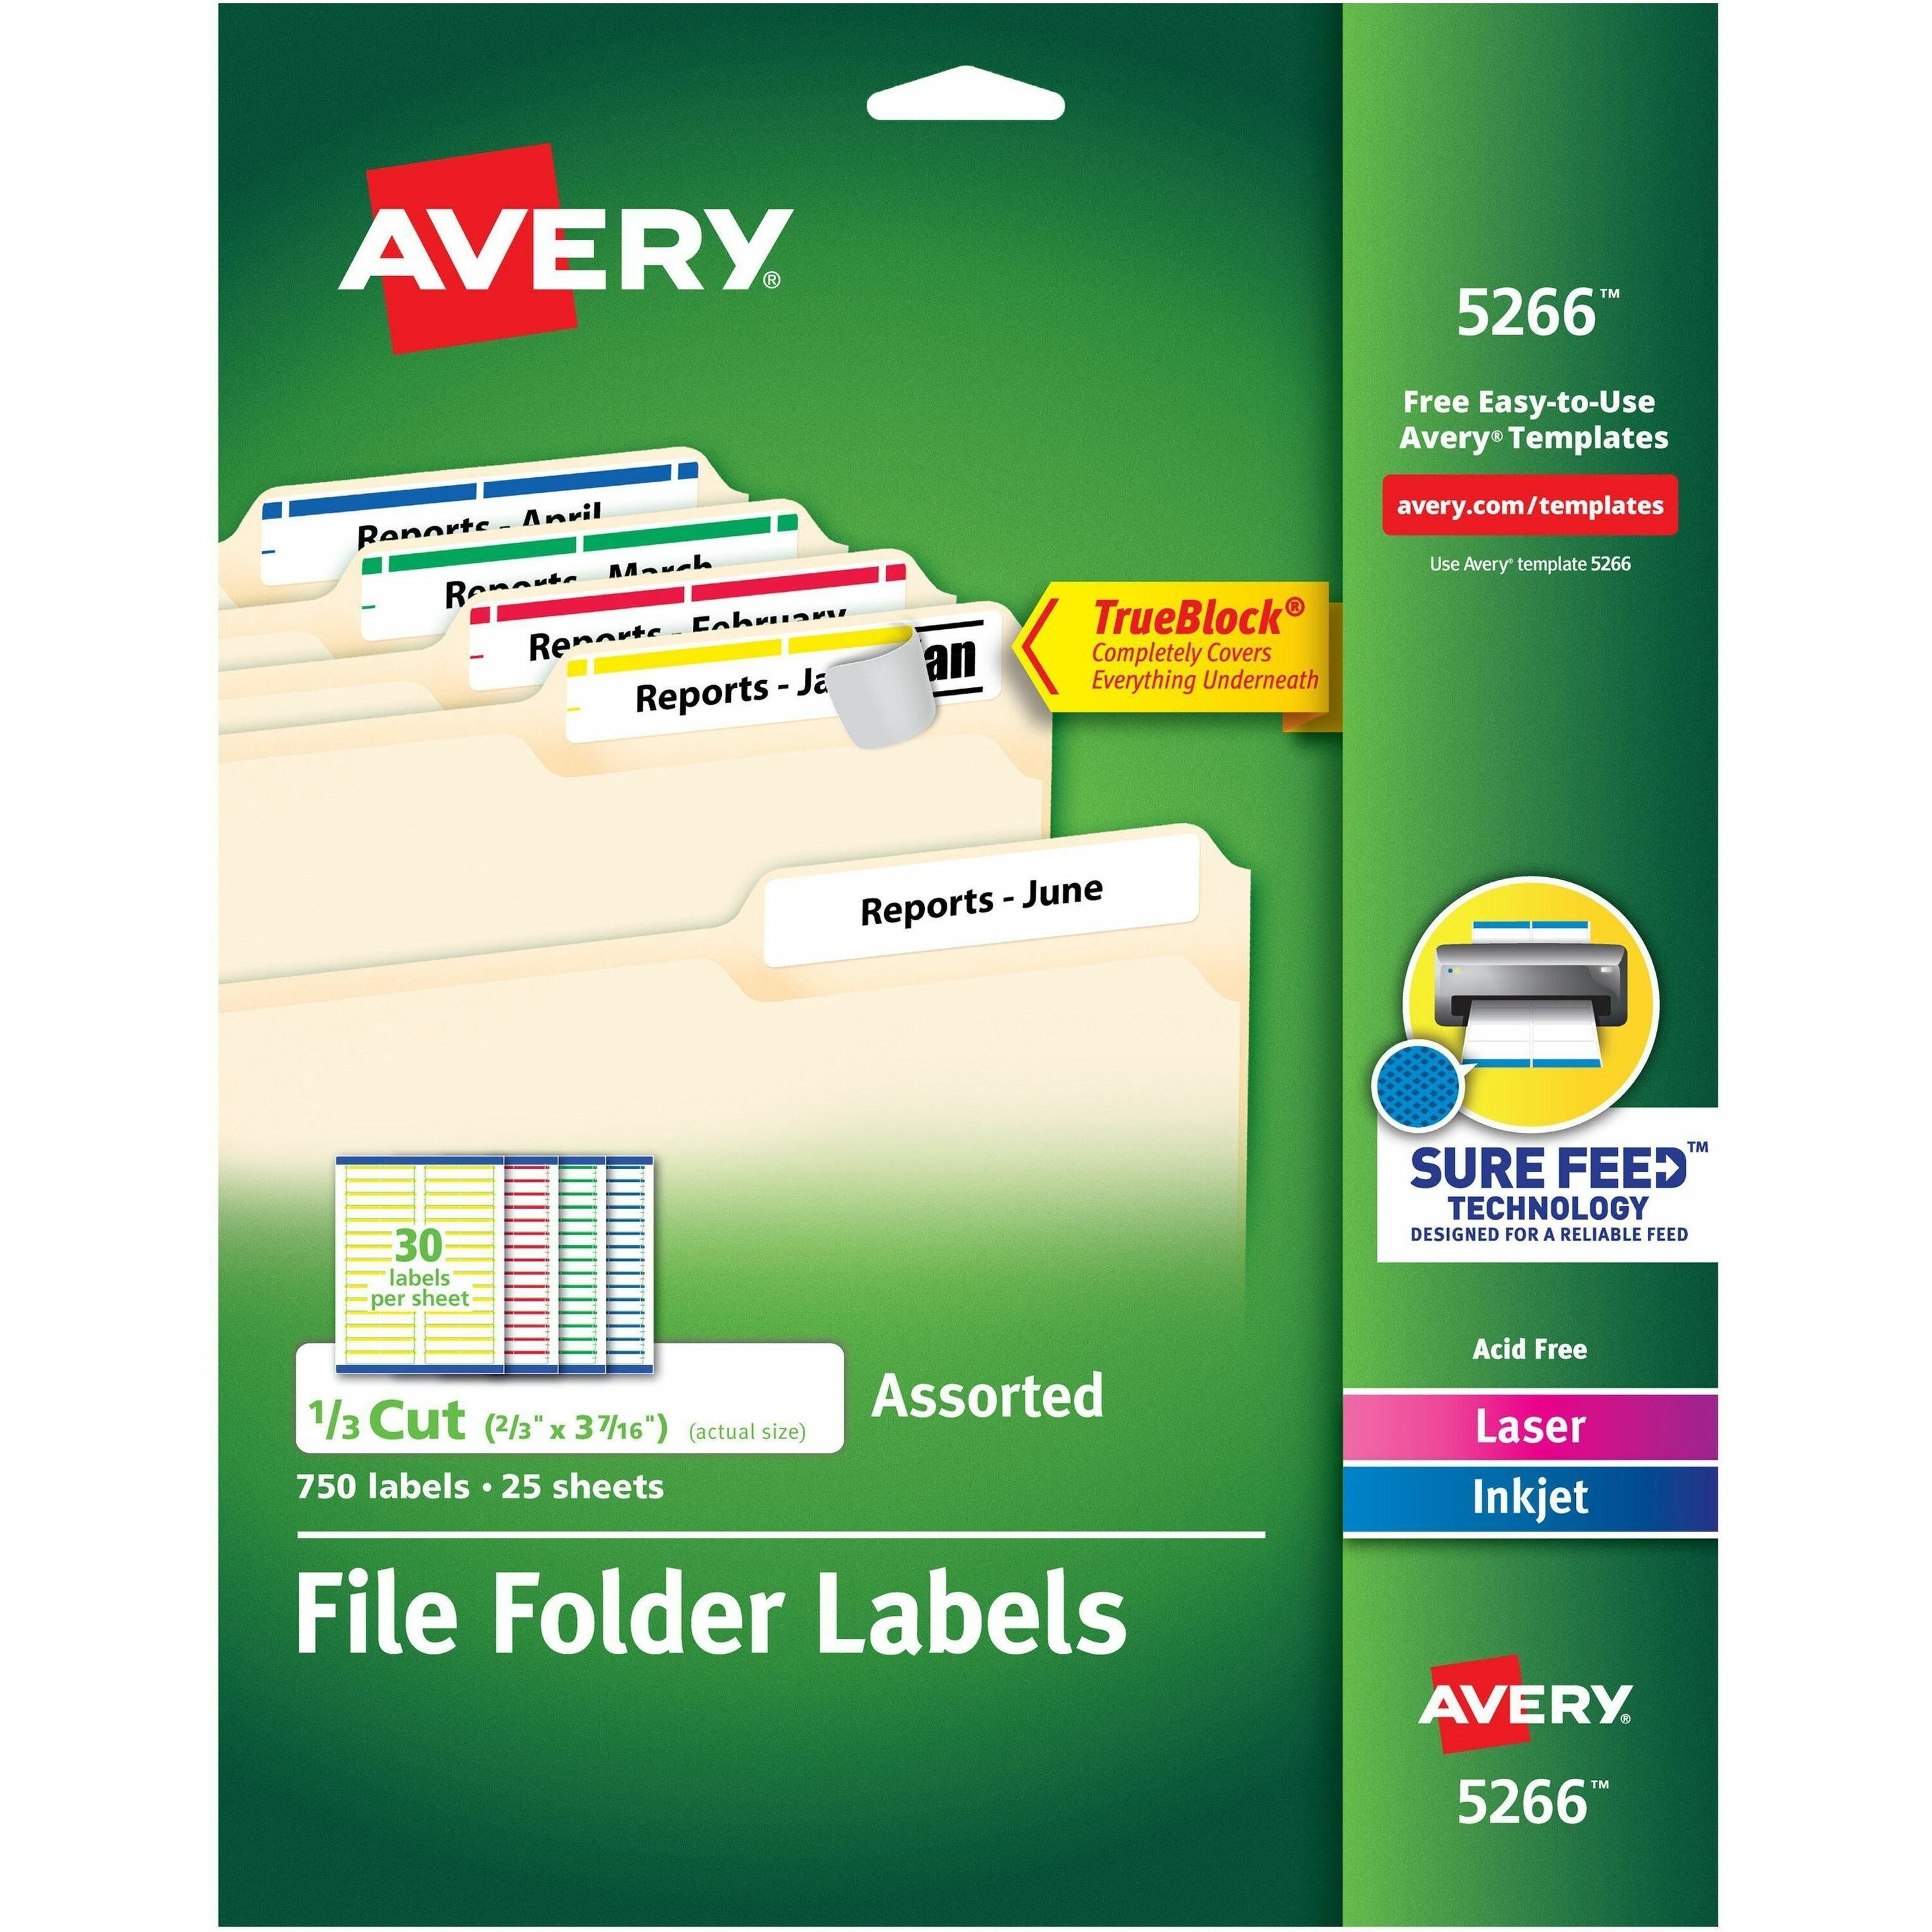 31-avery-5366-label-template-word-labels-2021